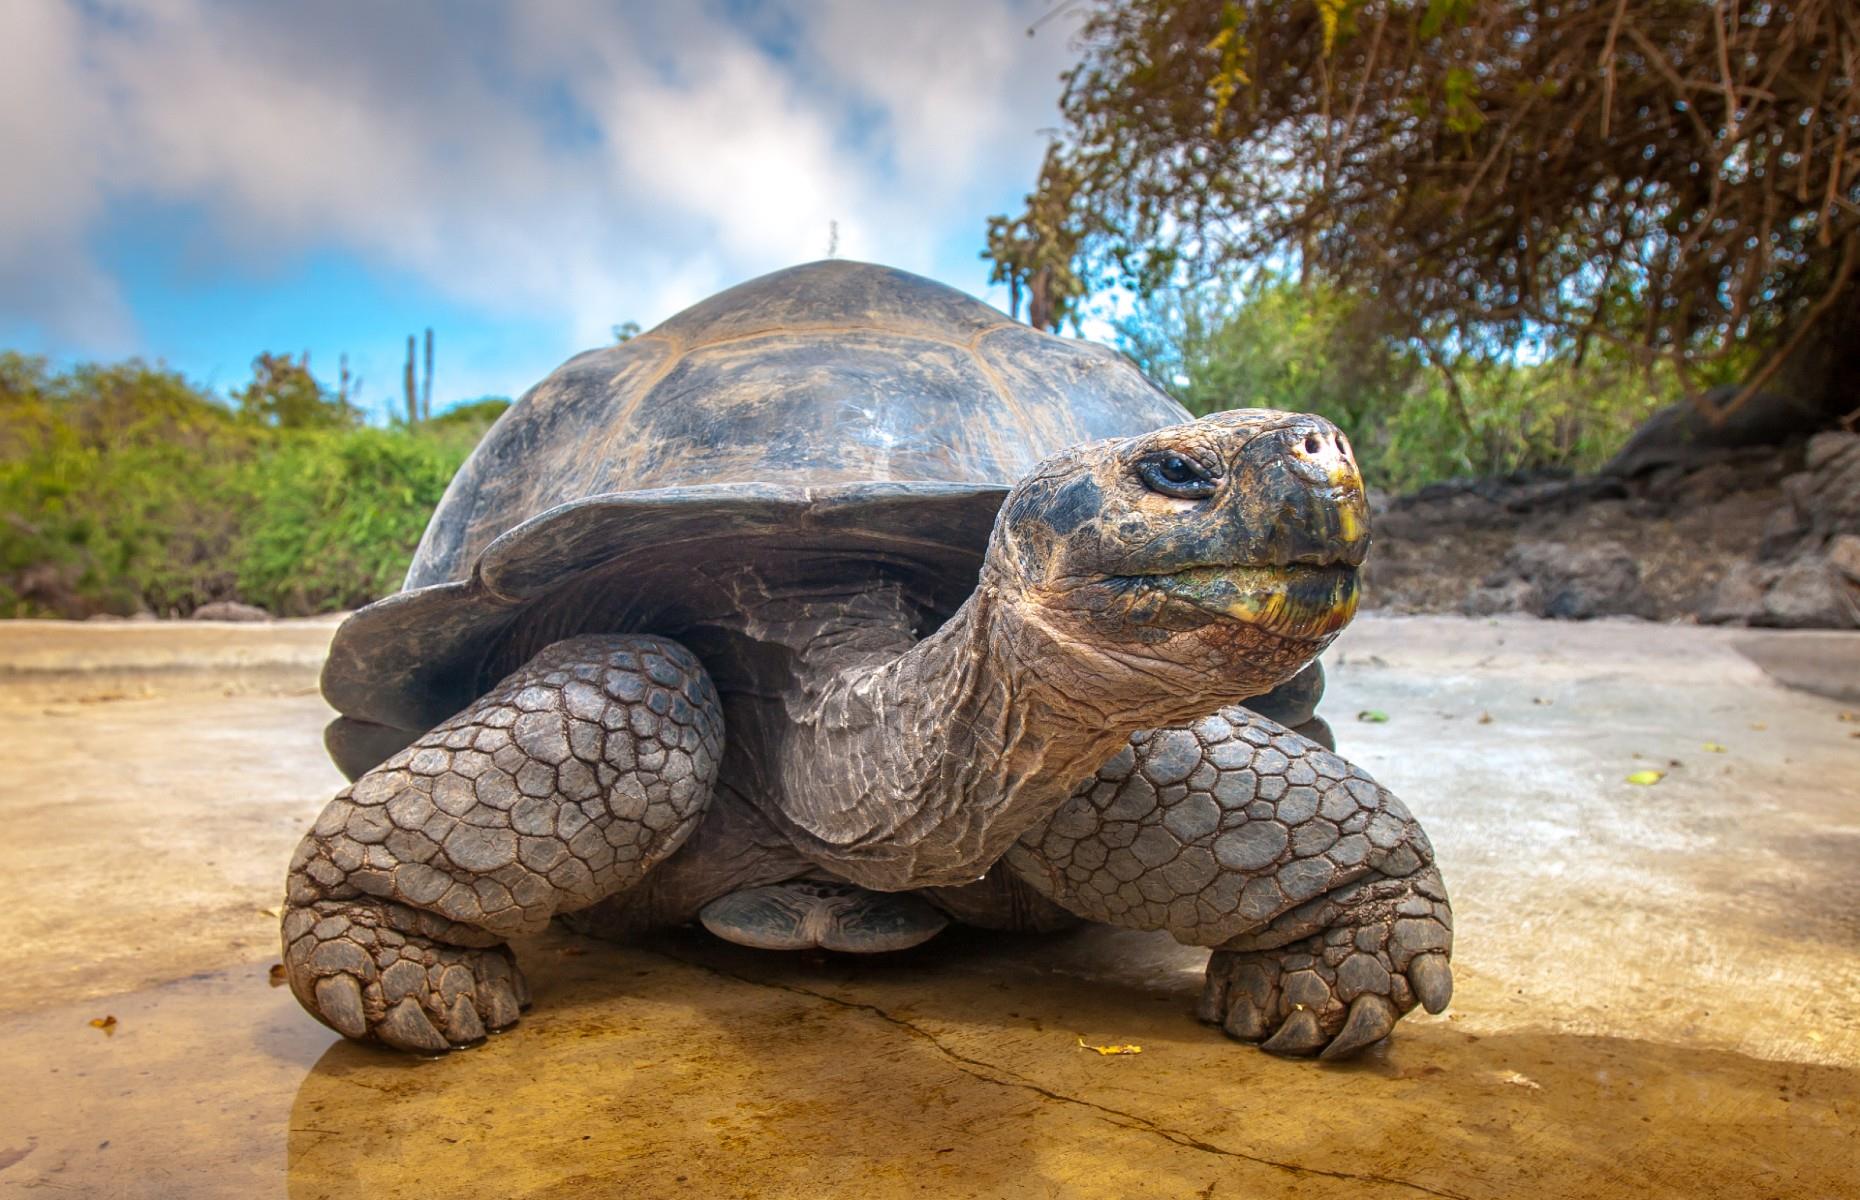 <p>The Galapagos' most famous resident – and namesake (Galapagos is an old Spanish word for tortoise) – these giant creatures live in harmony across 10 of the islands. Having arrived from mainland South America almost three million years ago, there are as many as <a href="https://galapagosconservation.org.uk/wildlife/galapagos-giant-tortoise/">12 different species</a> of the giant tortoise (slowly) roaming the archipelago looking for fruits, cactus pads and grasses to guzzle. However, they can survive for a whole year without food or water. You're more likely to spot them on Santa Cruz and Isabela at midday in cool season (June to November) or early morning and late afternoon in hot season (December to May).</p>